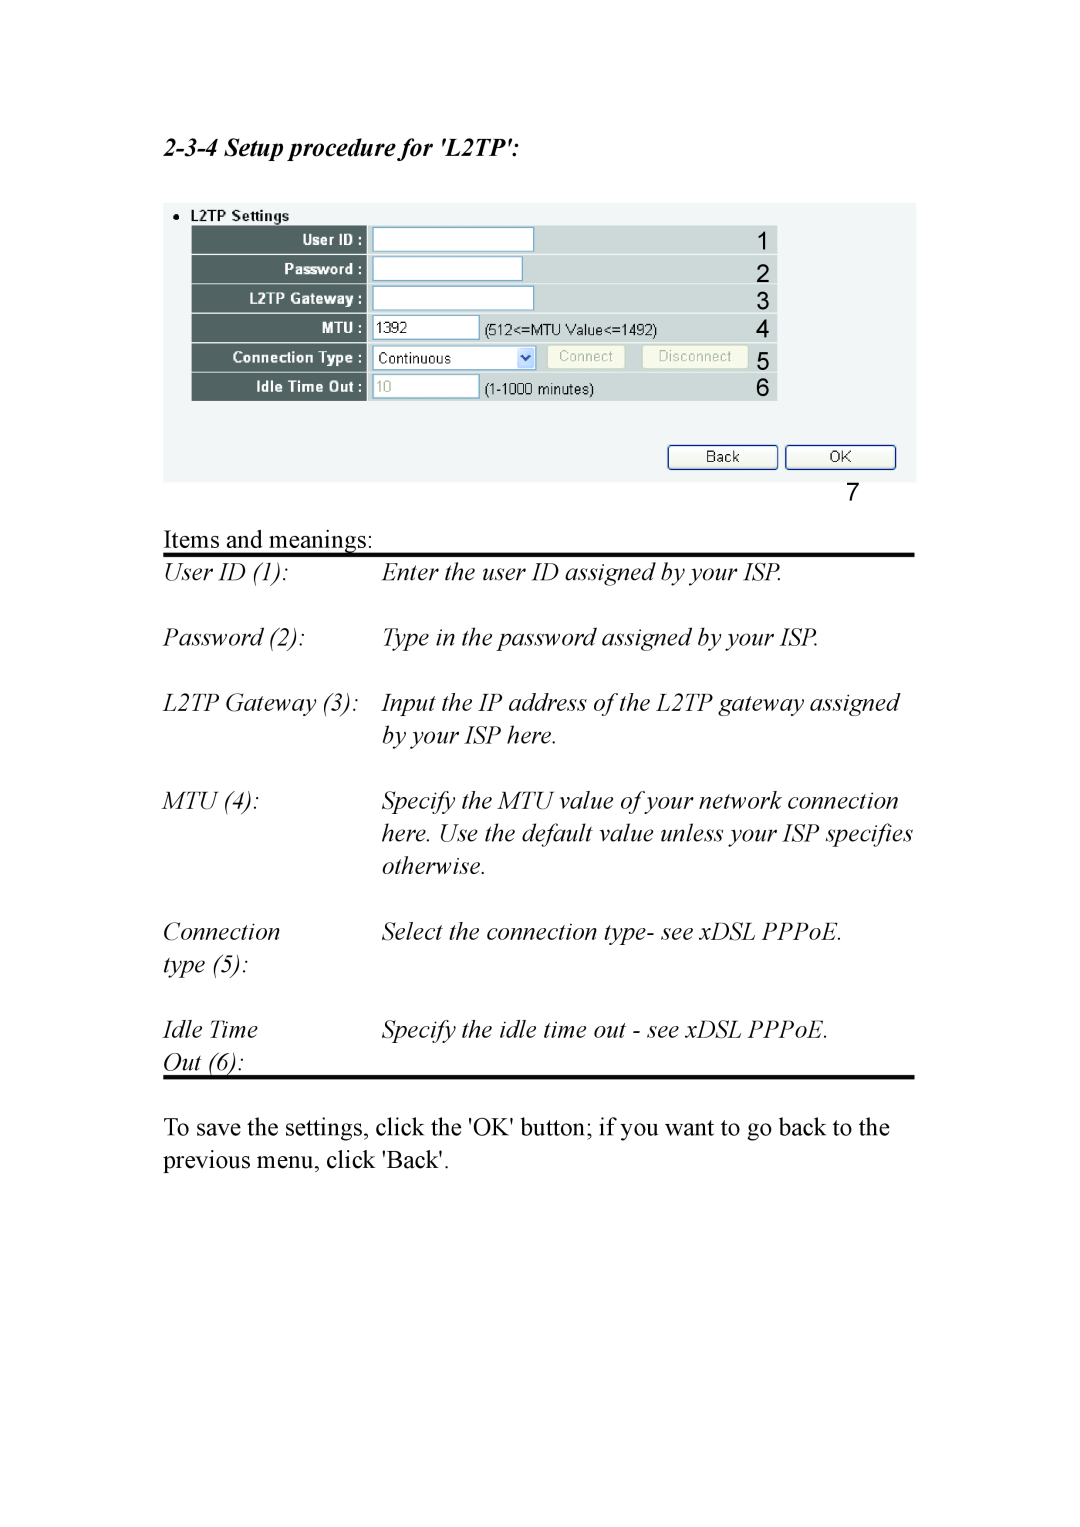 Intellinet Network Solutions INT-524315-UM-0808-1 user manual Setup procedure for L2TP, Items and meanings 